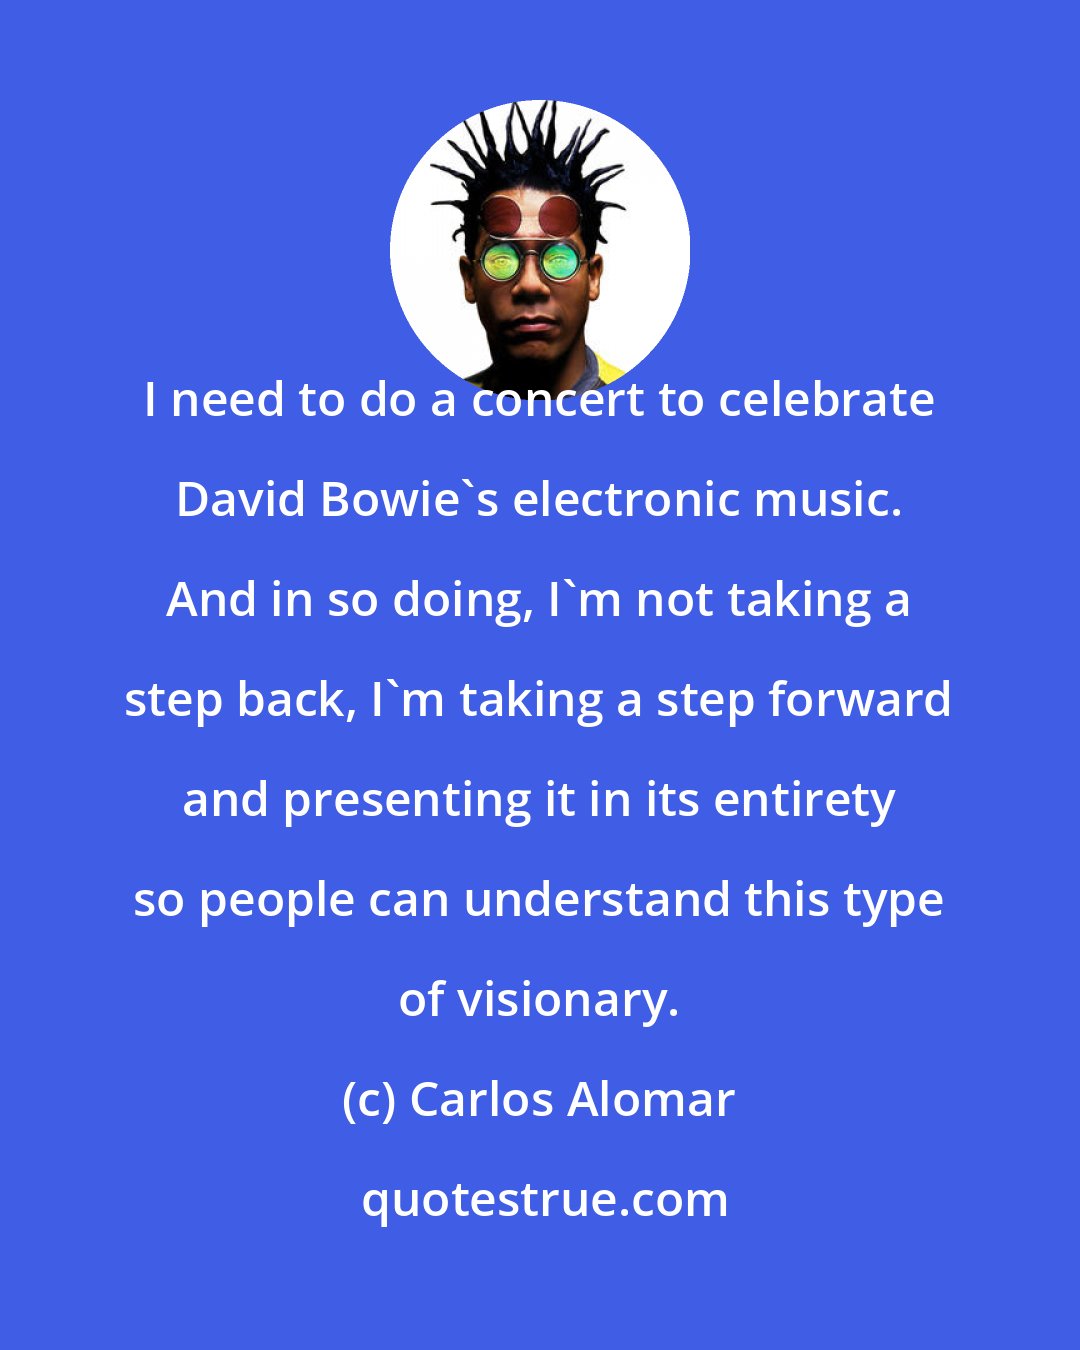 Carlos Alomar: I need to do a concert to celebrate David Bowie's electronic music. And in so doing, I'm not taking a step back, I'm taking a step forward and presenting it in its entirety so people can understand this type of visionary.